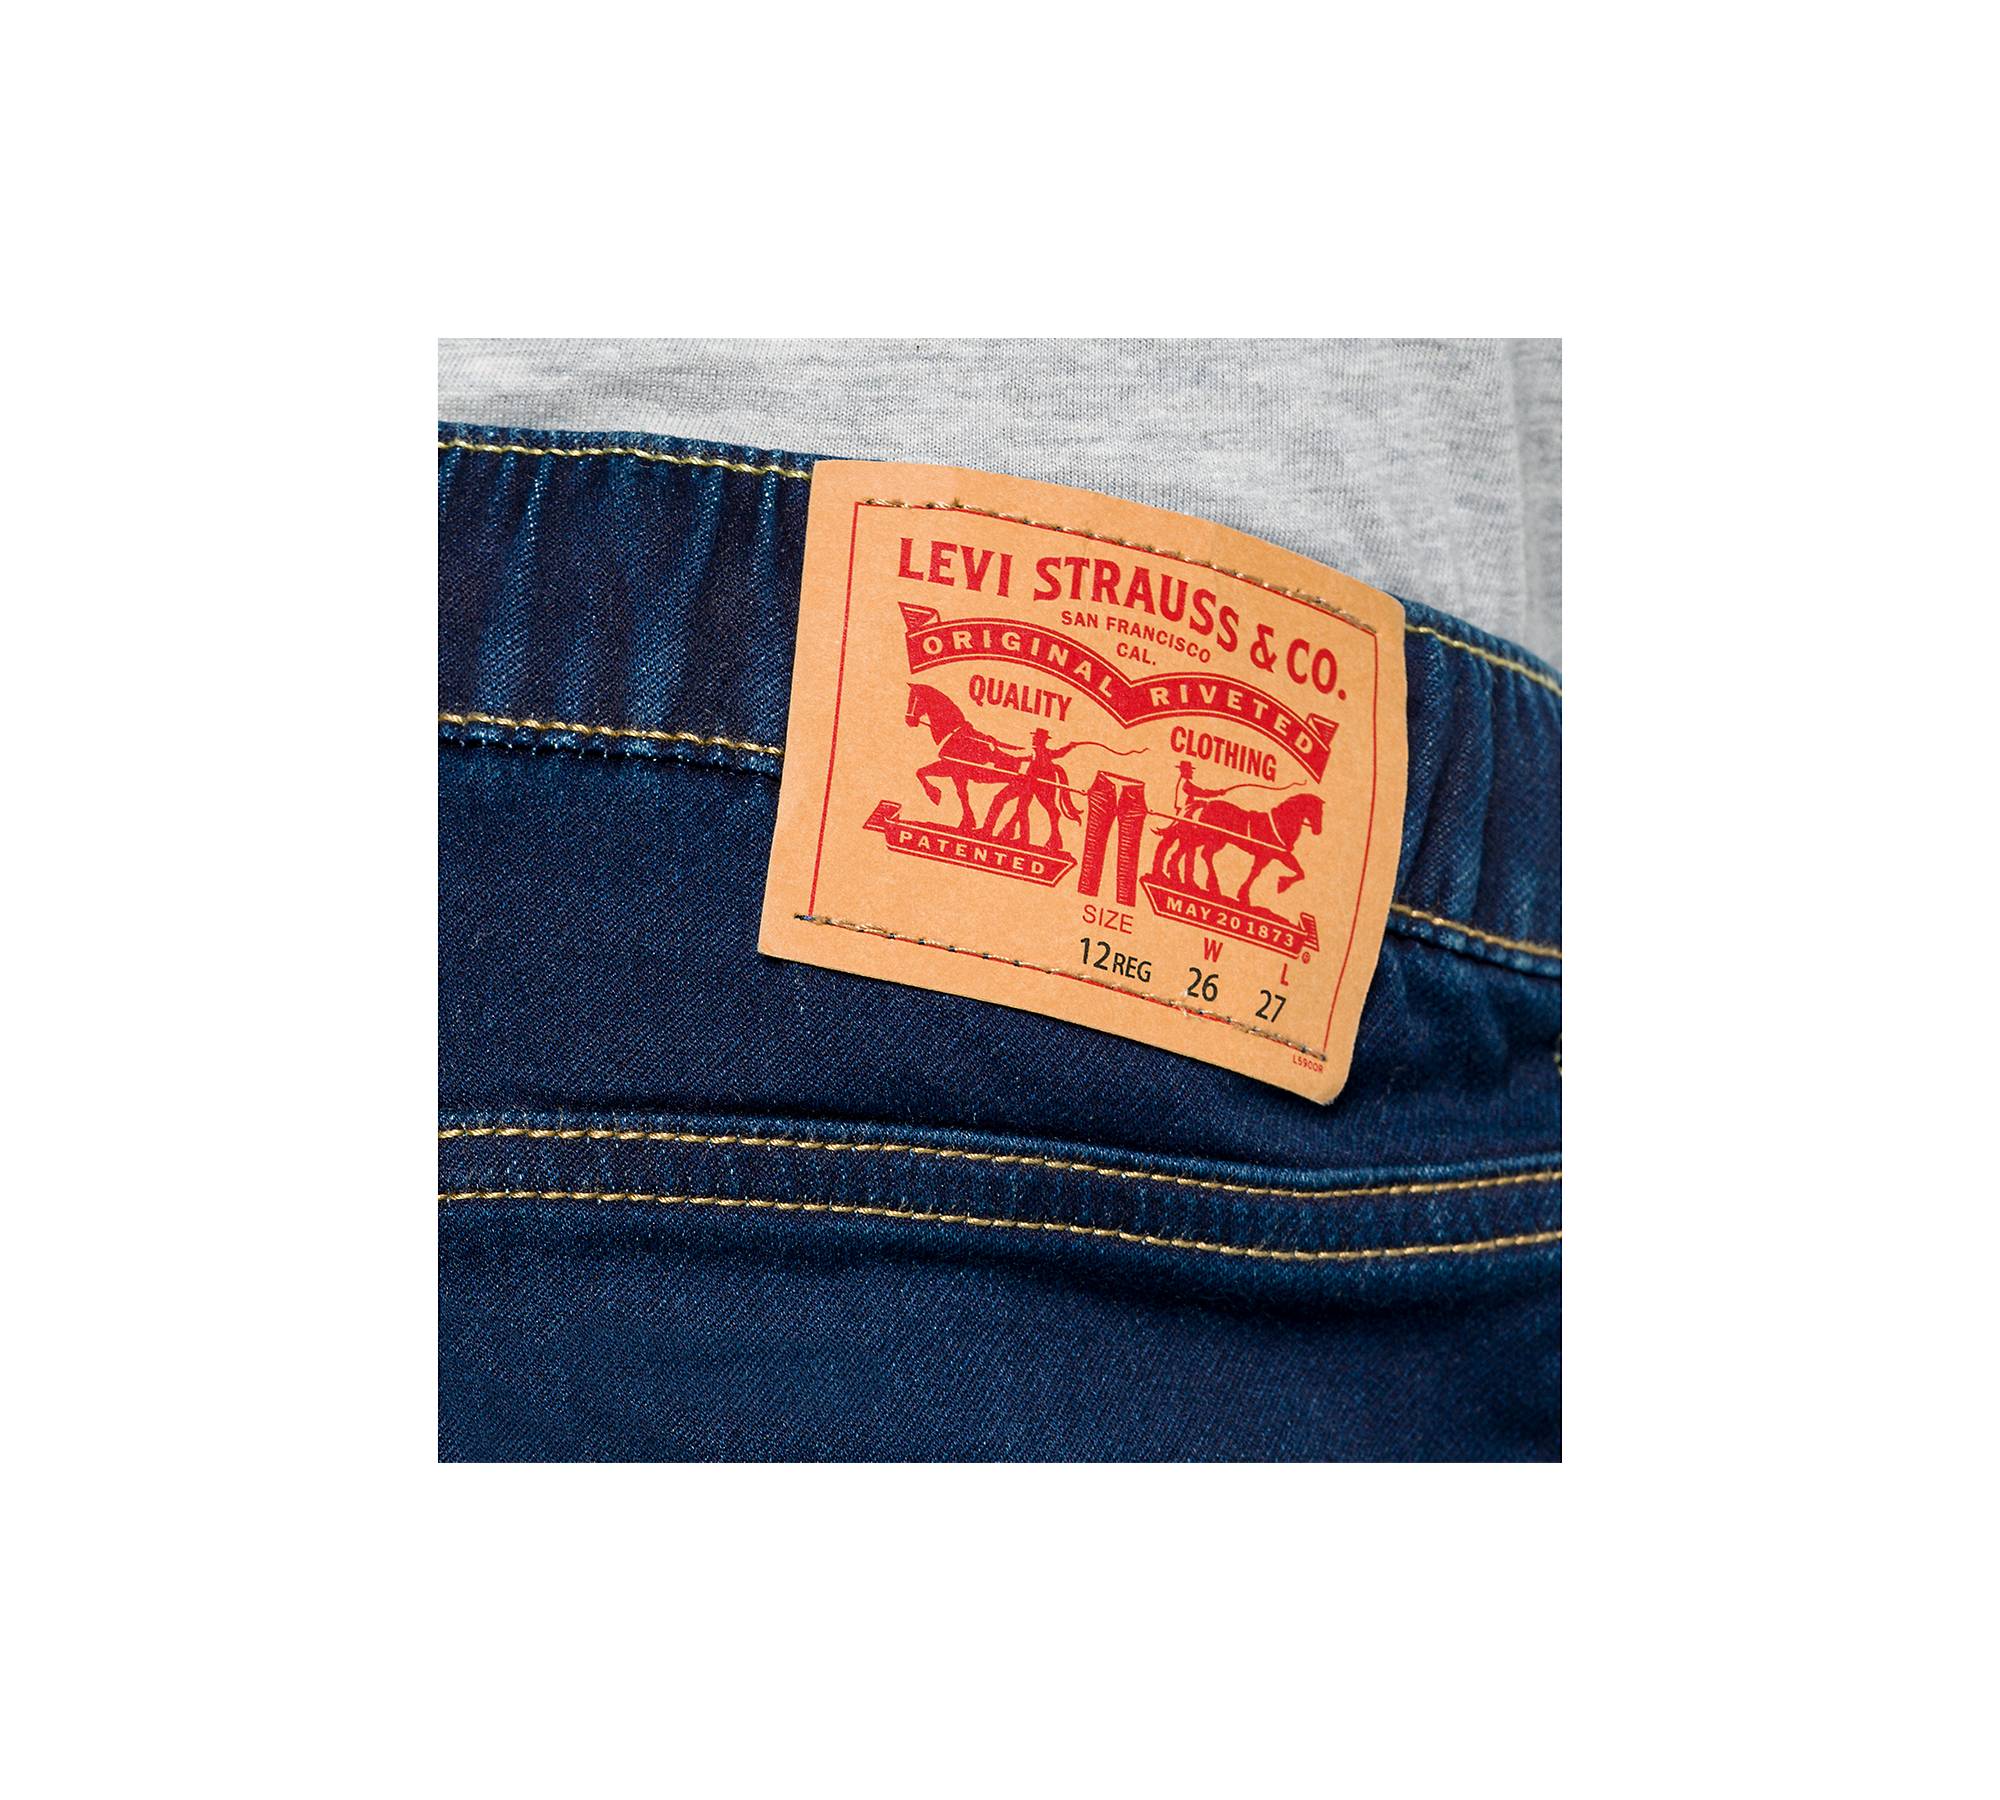 Boys Clothes With Tags Levi's And Reel Legends for Sale in